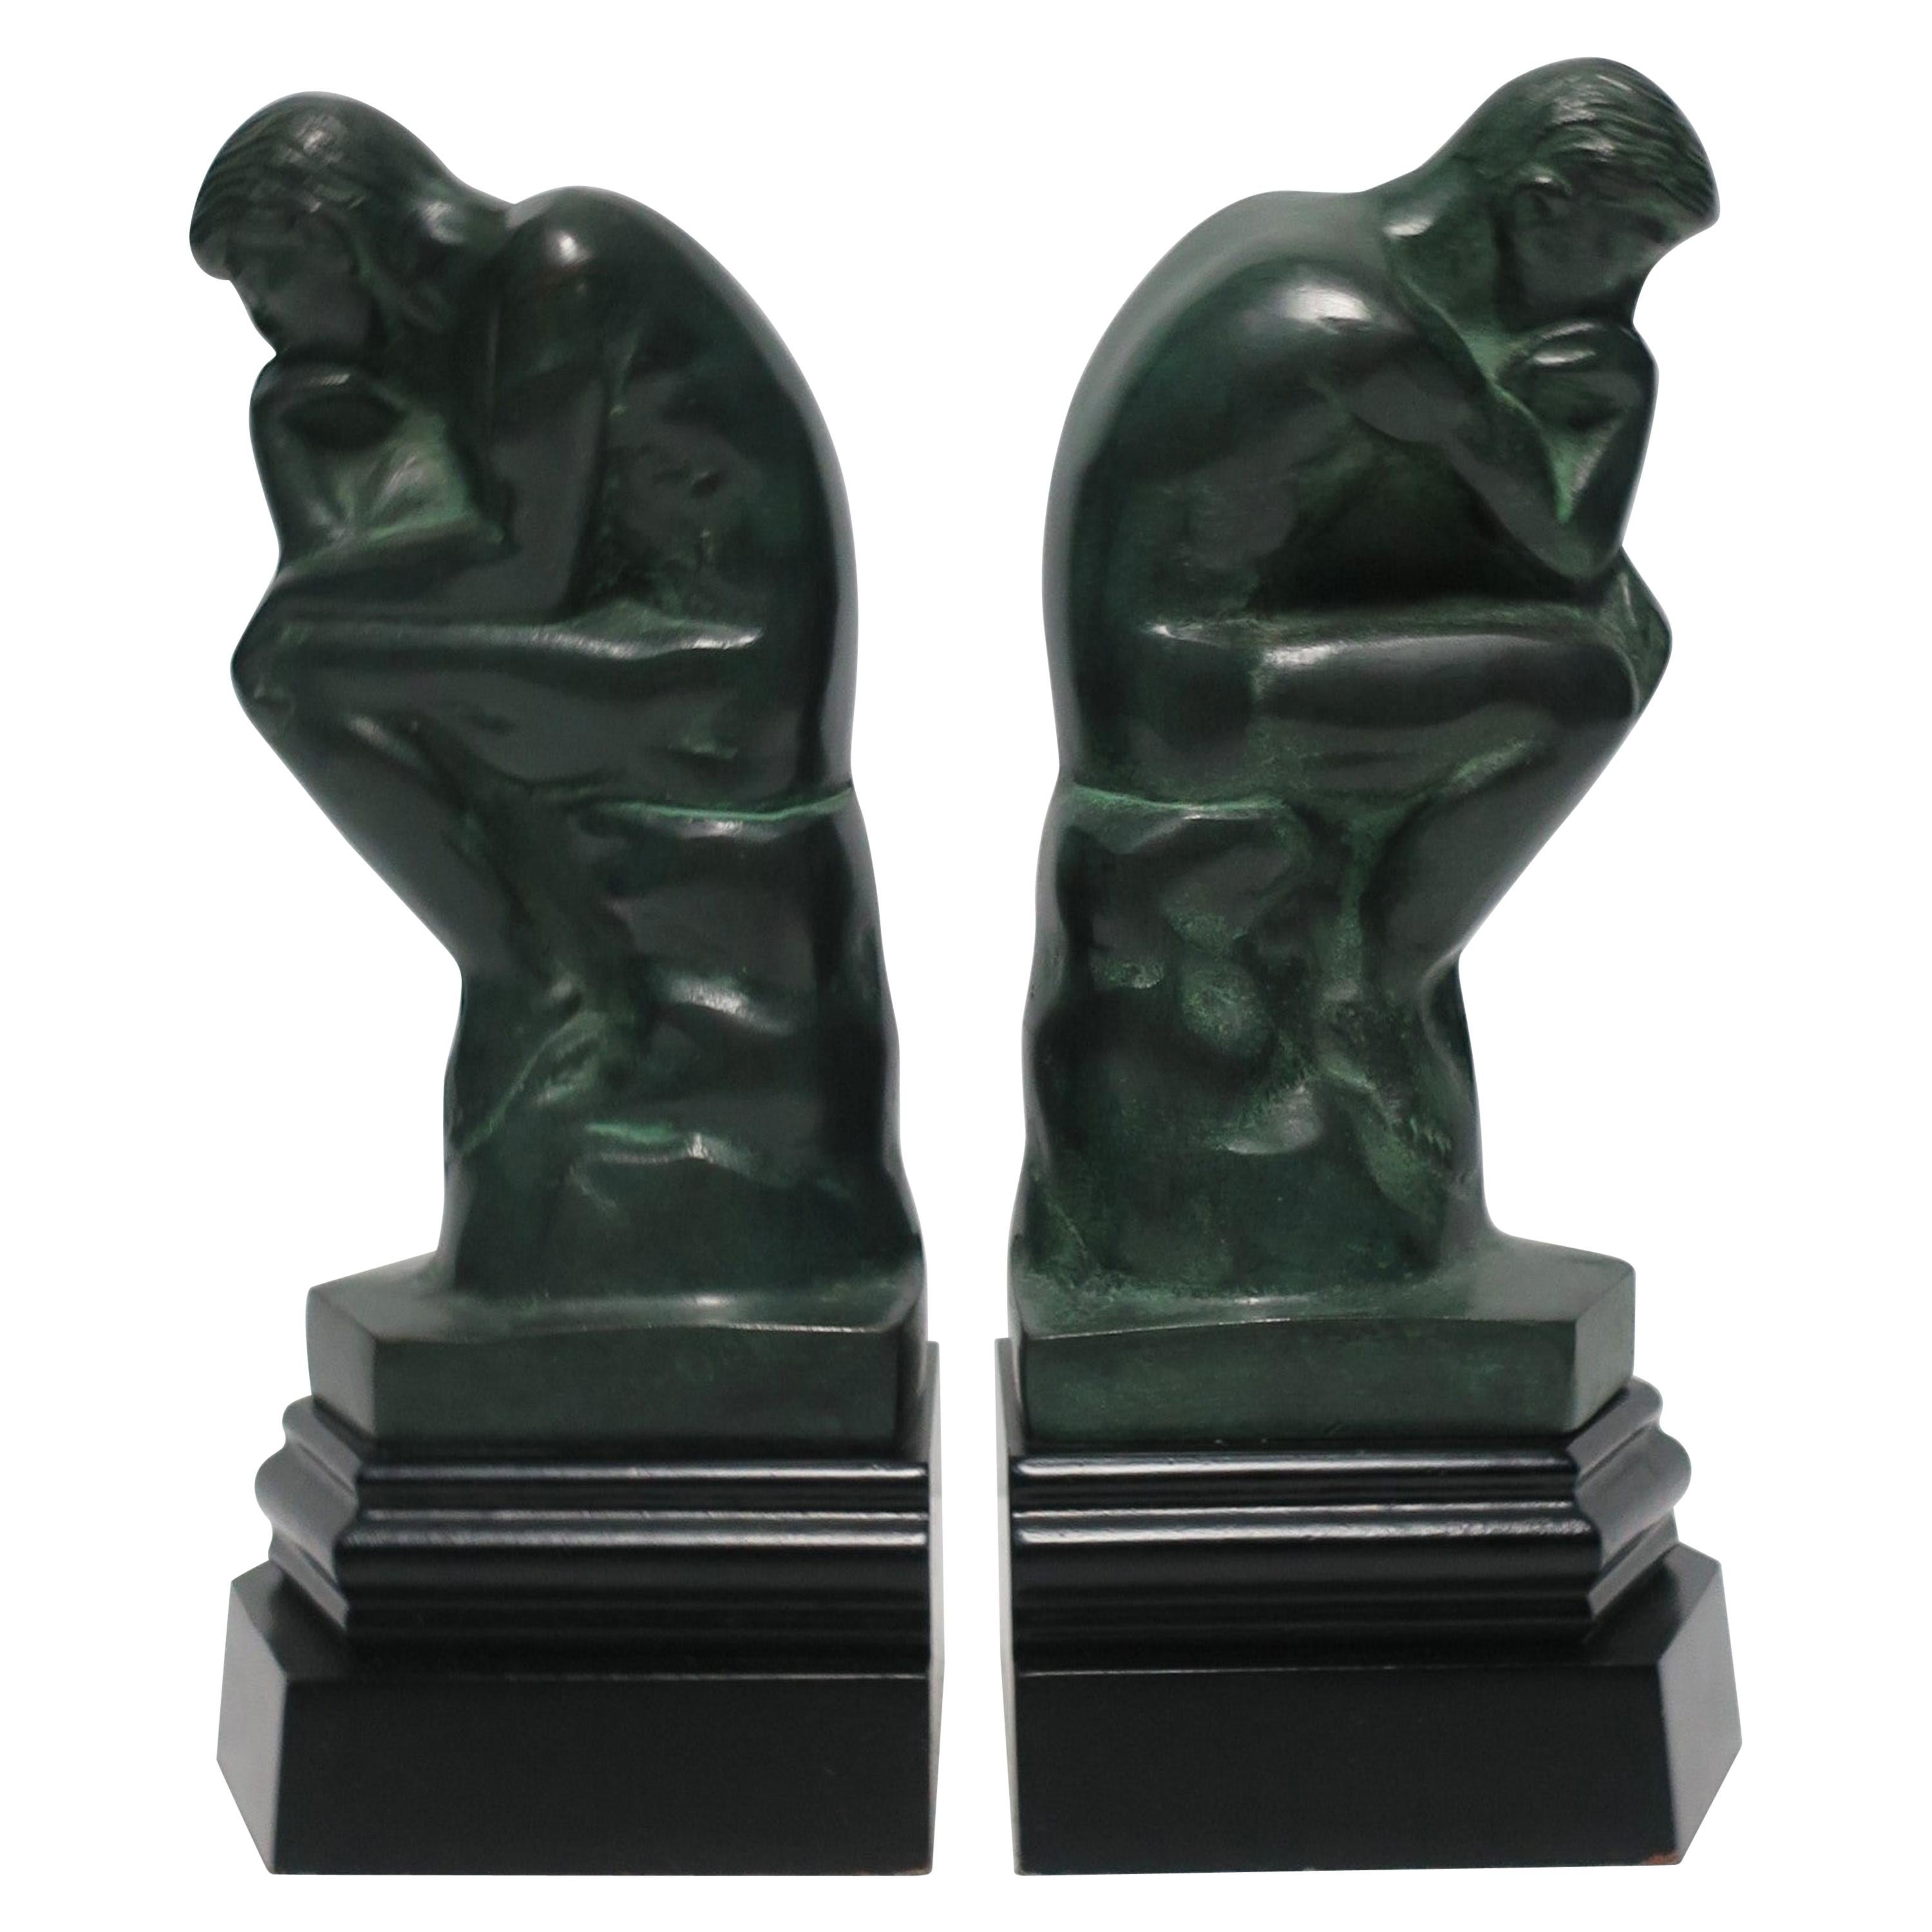 Black and Green Male Sculpture Bookends, Pair